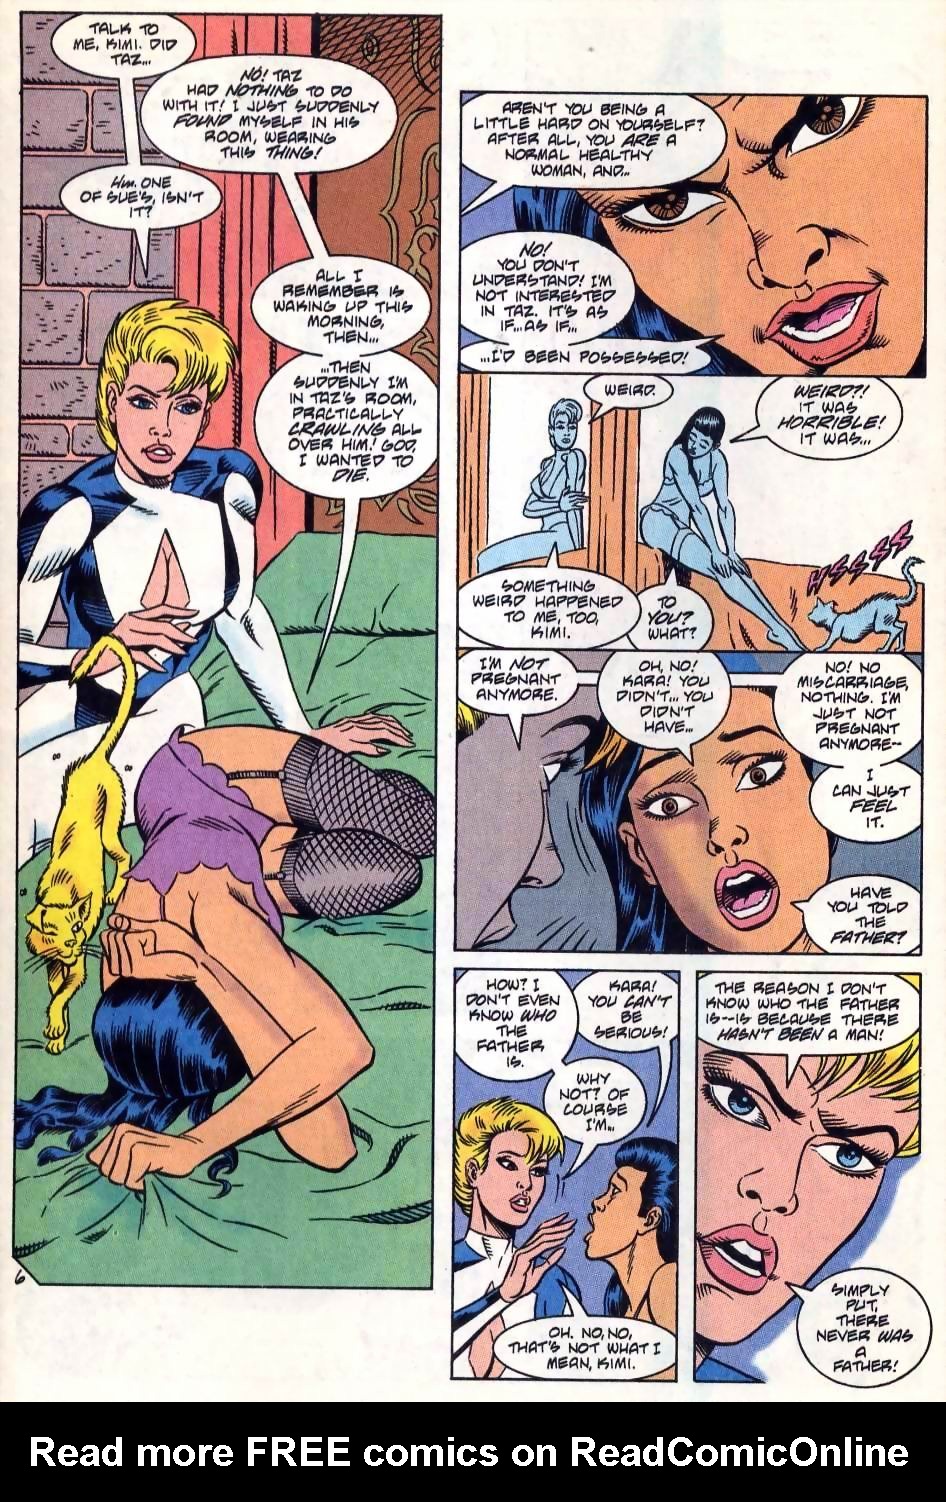 Justice League International (1993) 54 Page 6